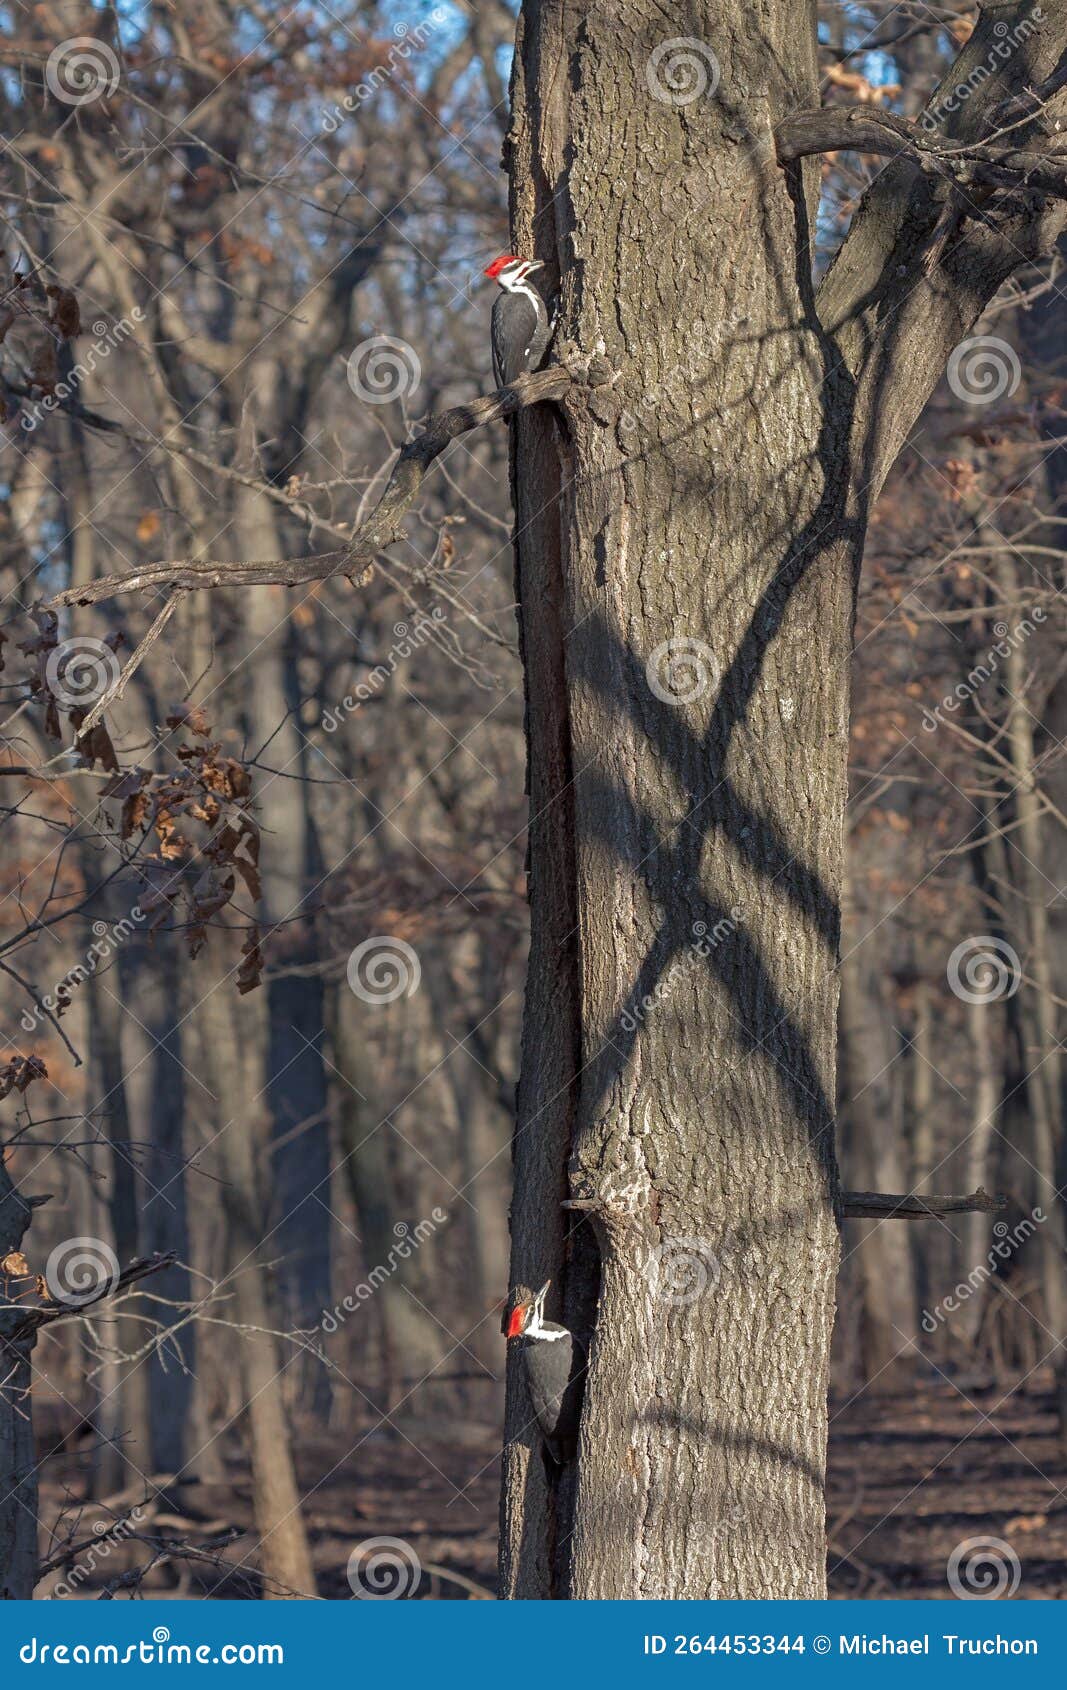 two pileated woodpeckers peck in a tree